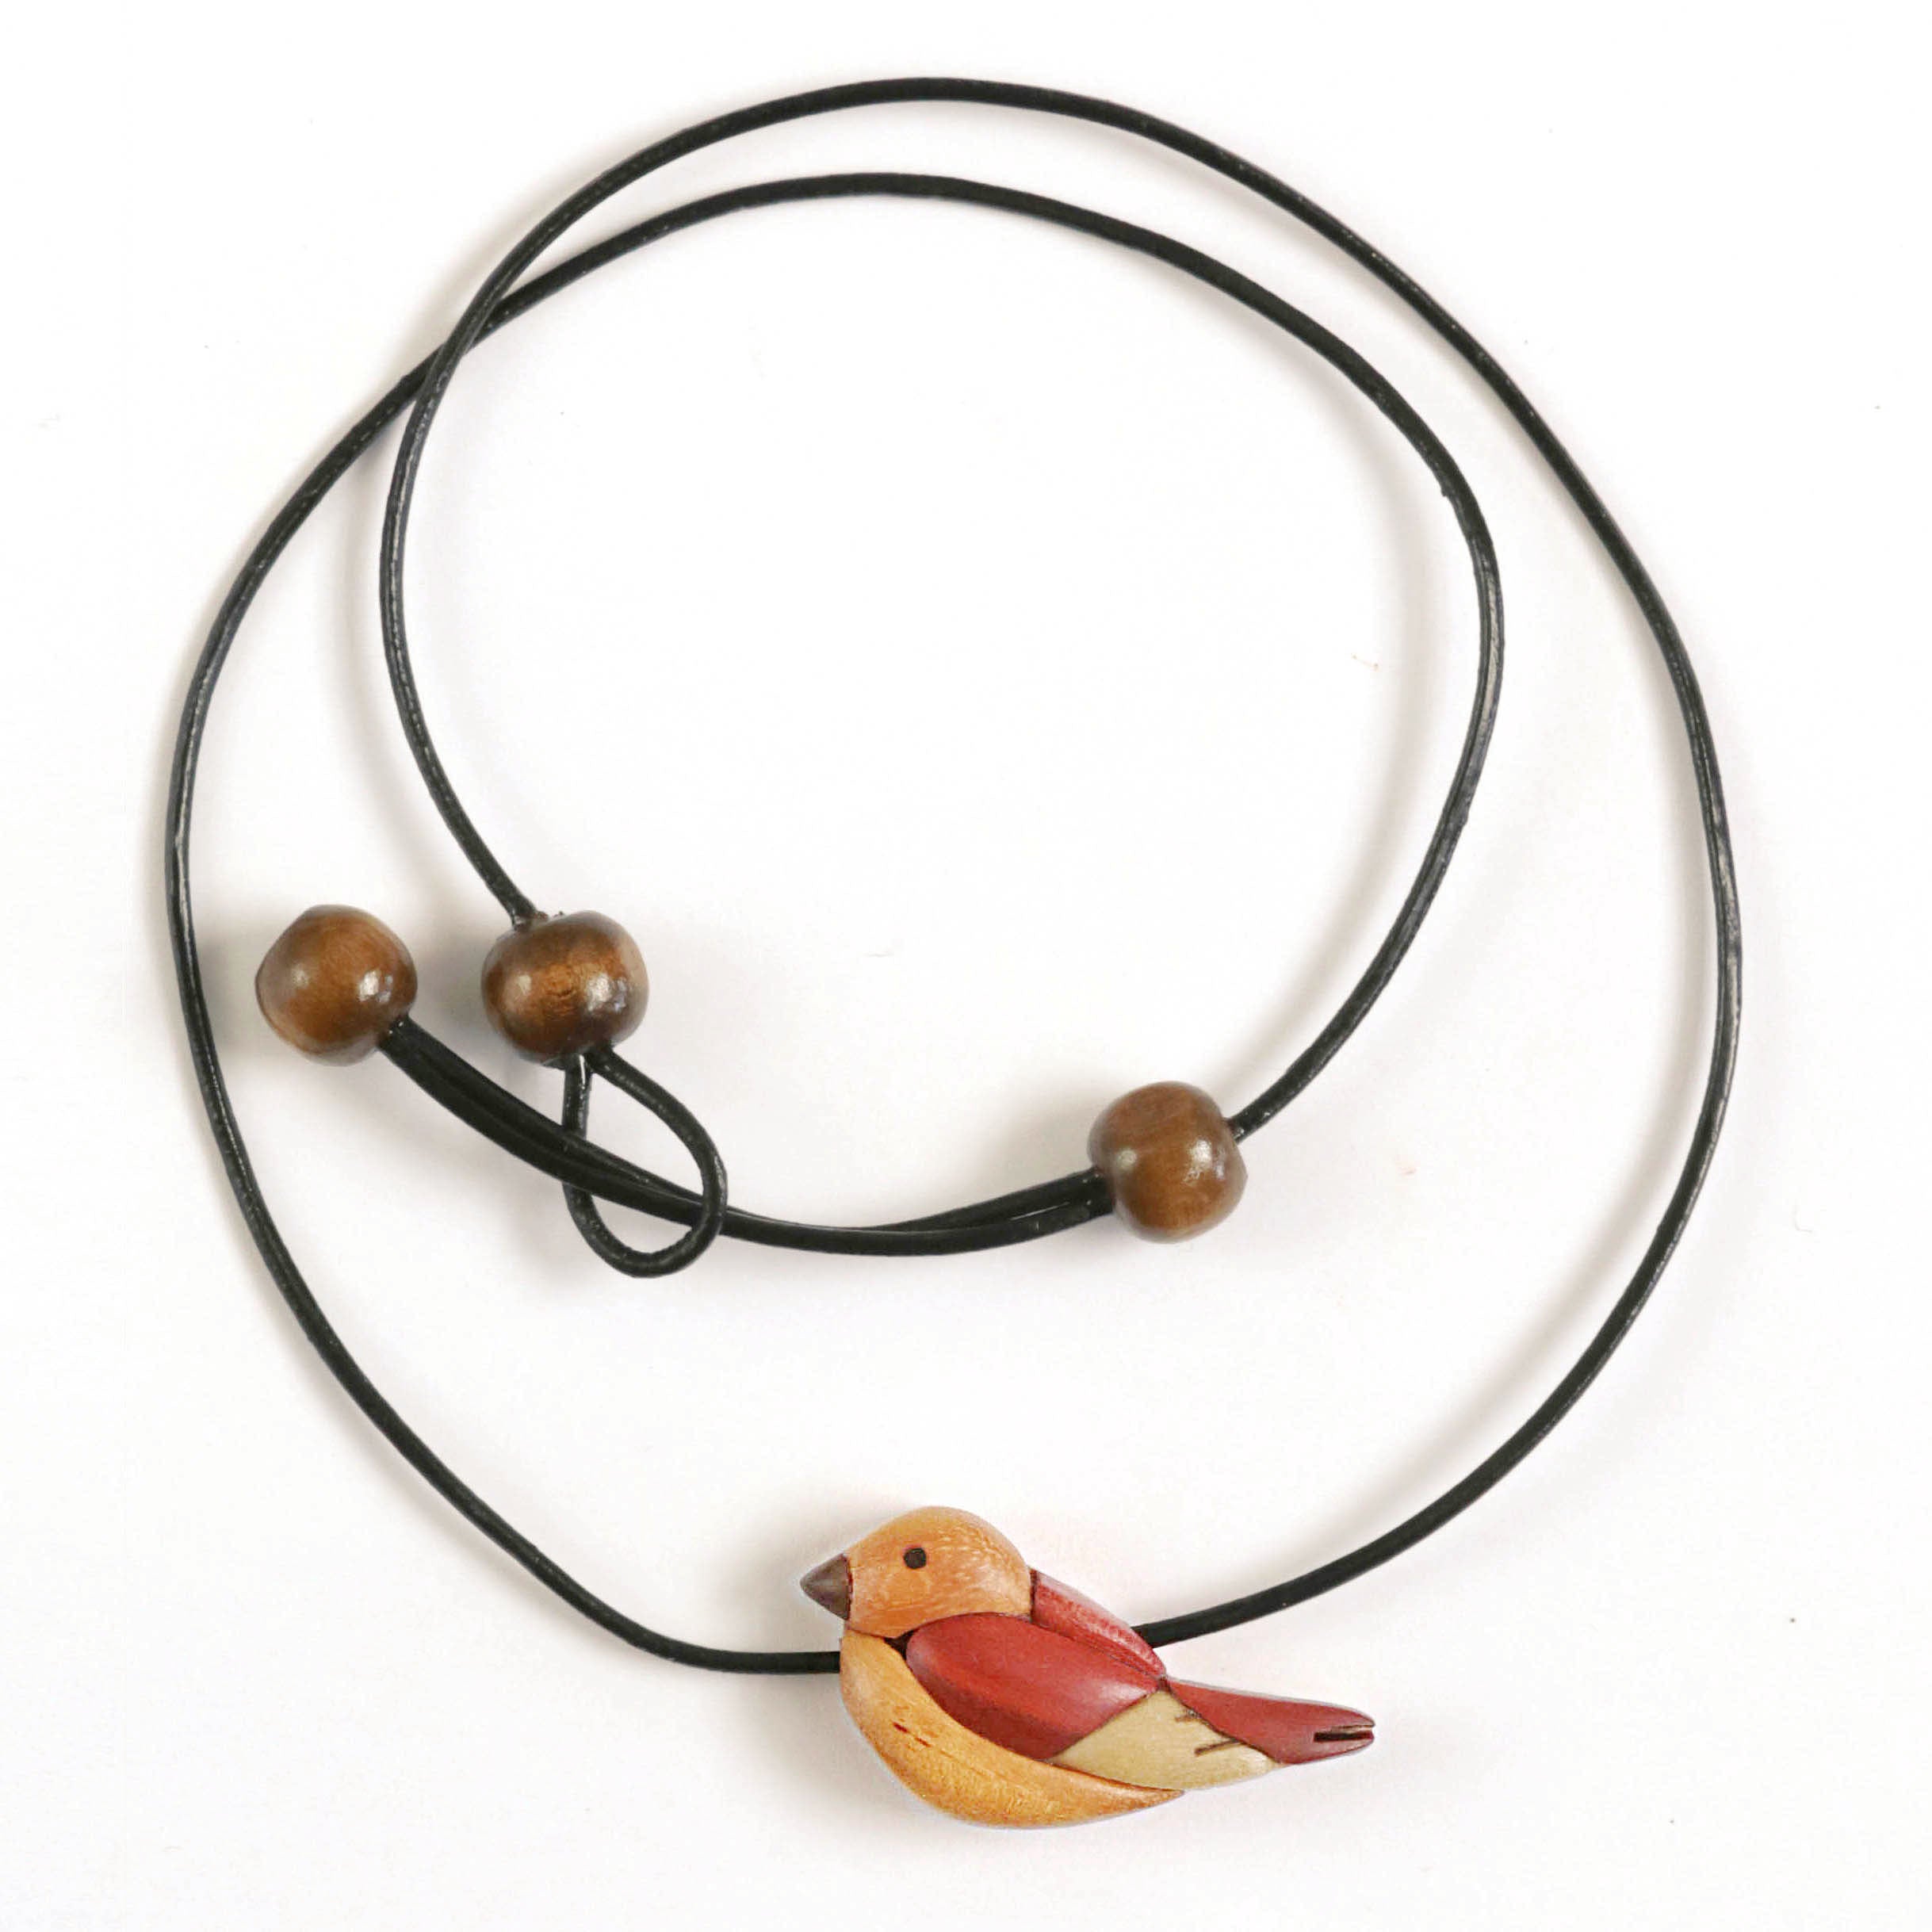 Wooden bird pendant, Sparrow necklace intarsia in exotic wood, Bird choker in precious woods, Cute and eco sparrow pendant